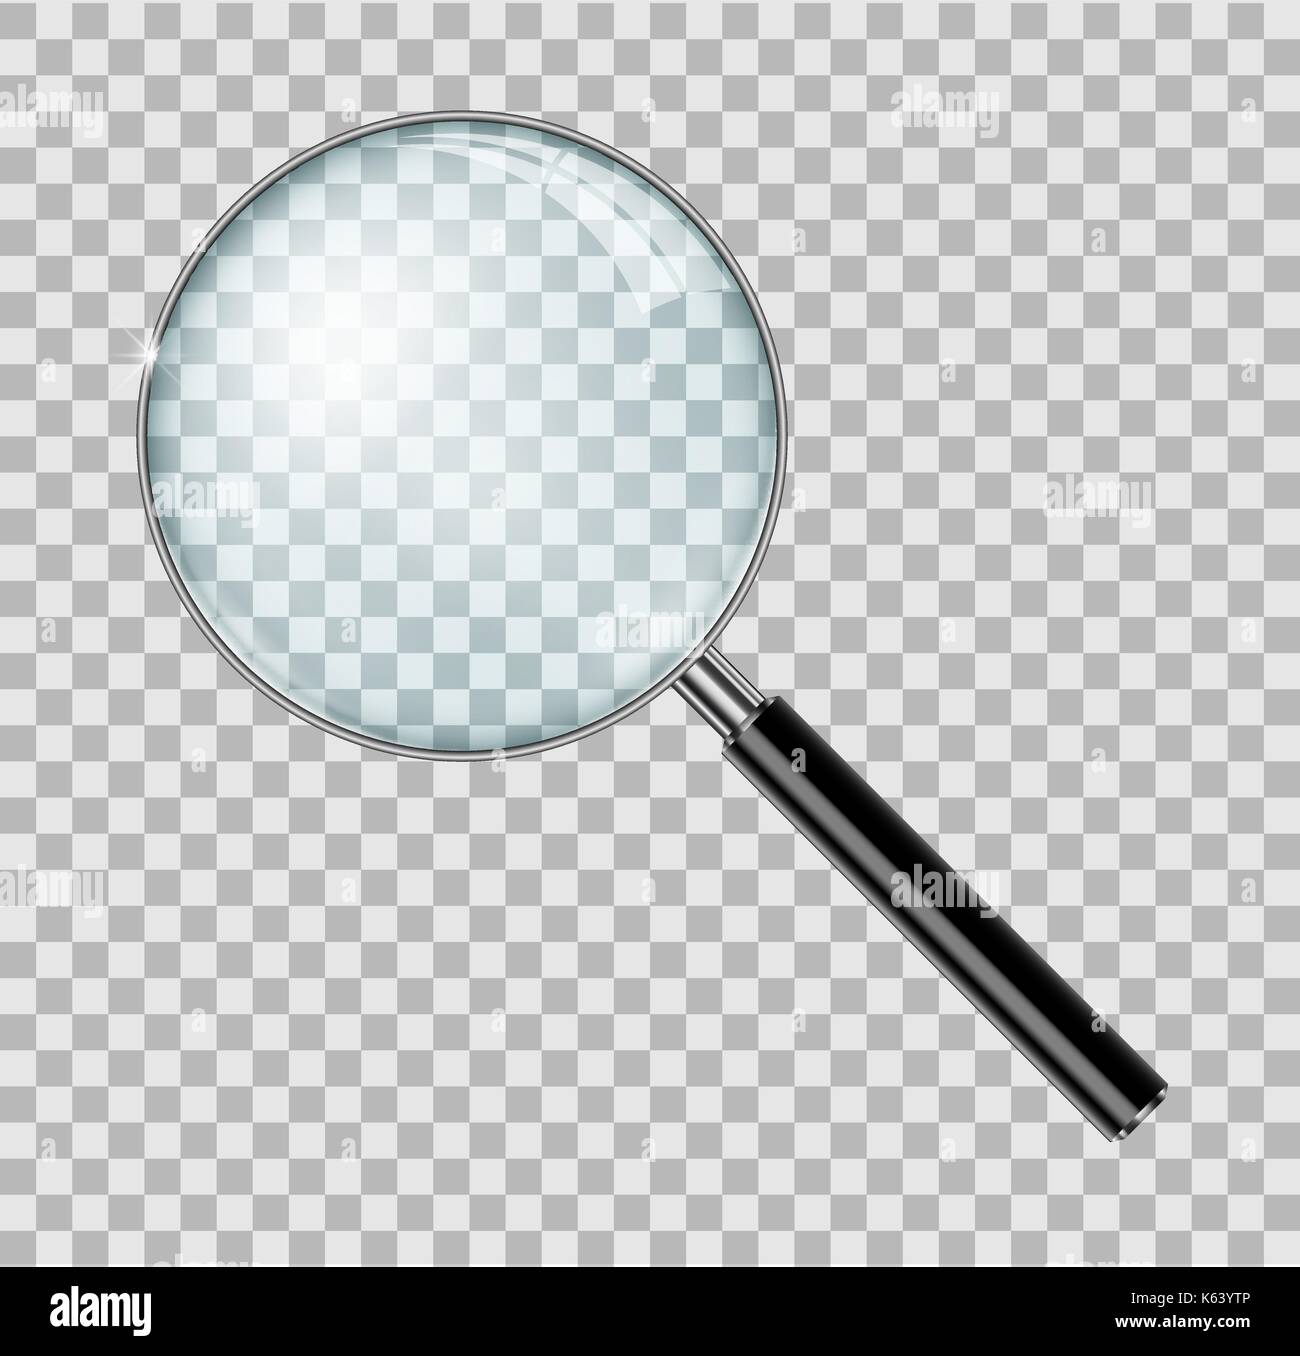 Magnifying glass with steel frame isolated. Realistic Magnifying glass lens for zoom on checkered background. vector illustration Stock Vector